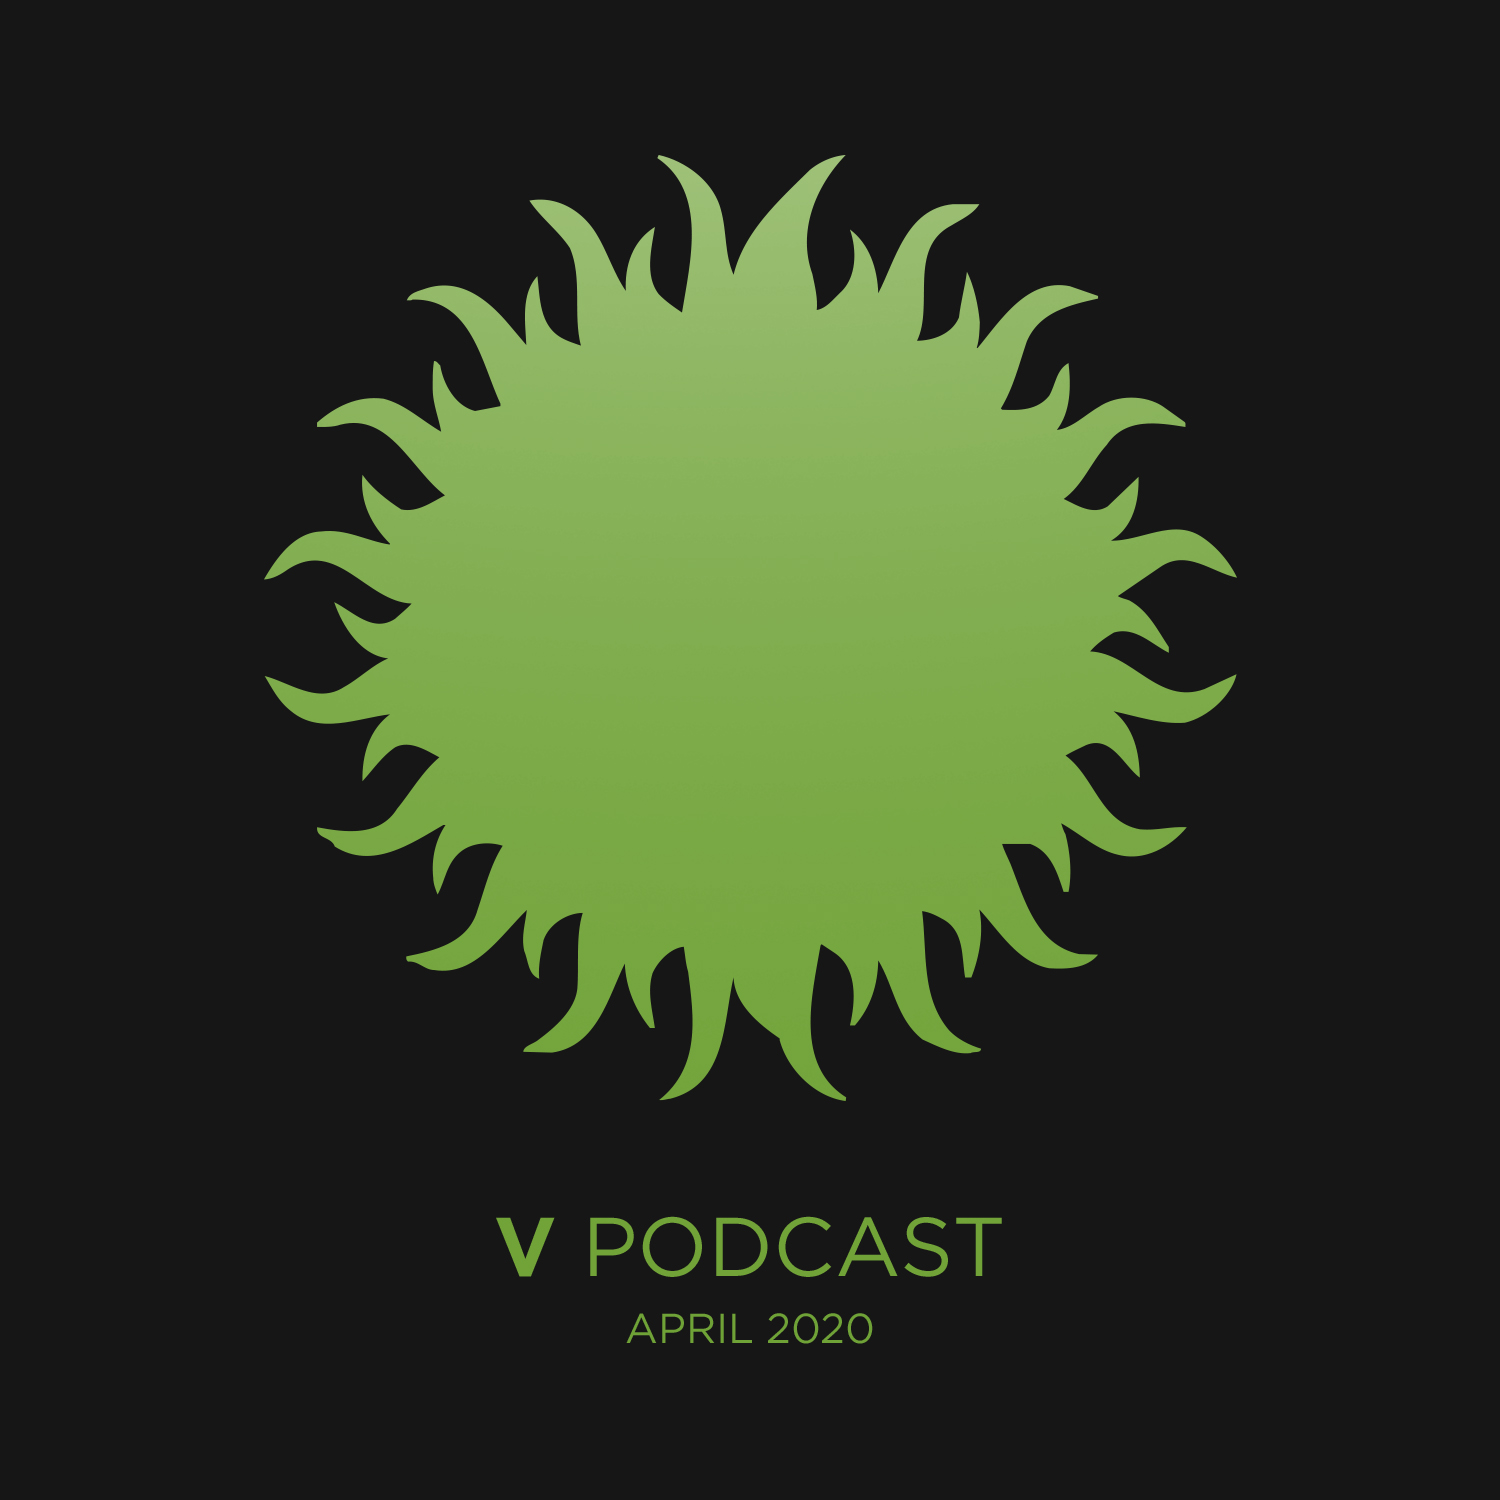 V Podcast 088 - Drum and Bass - hosted by Bryan Gee Artwork